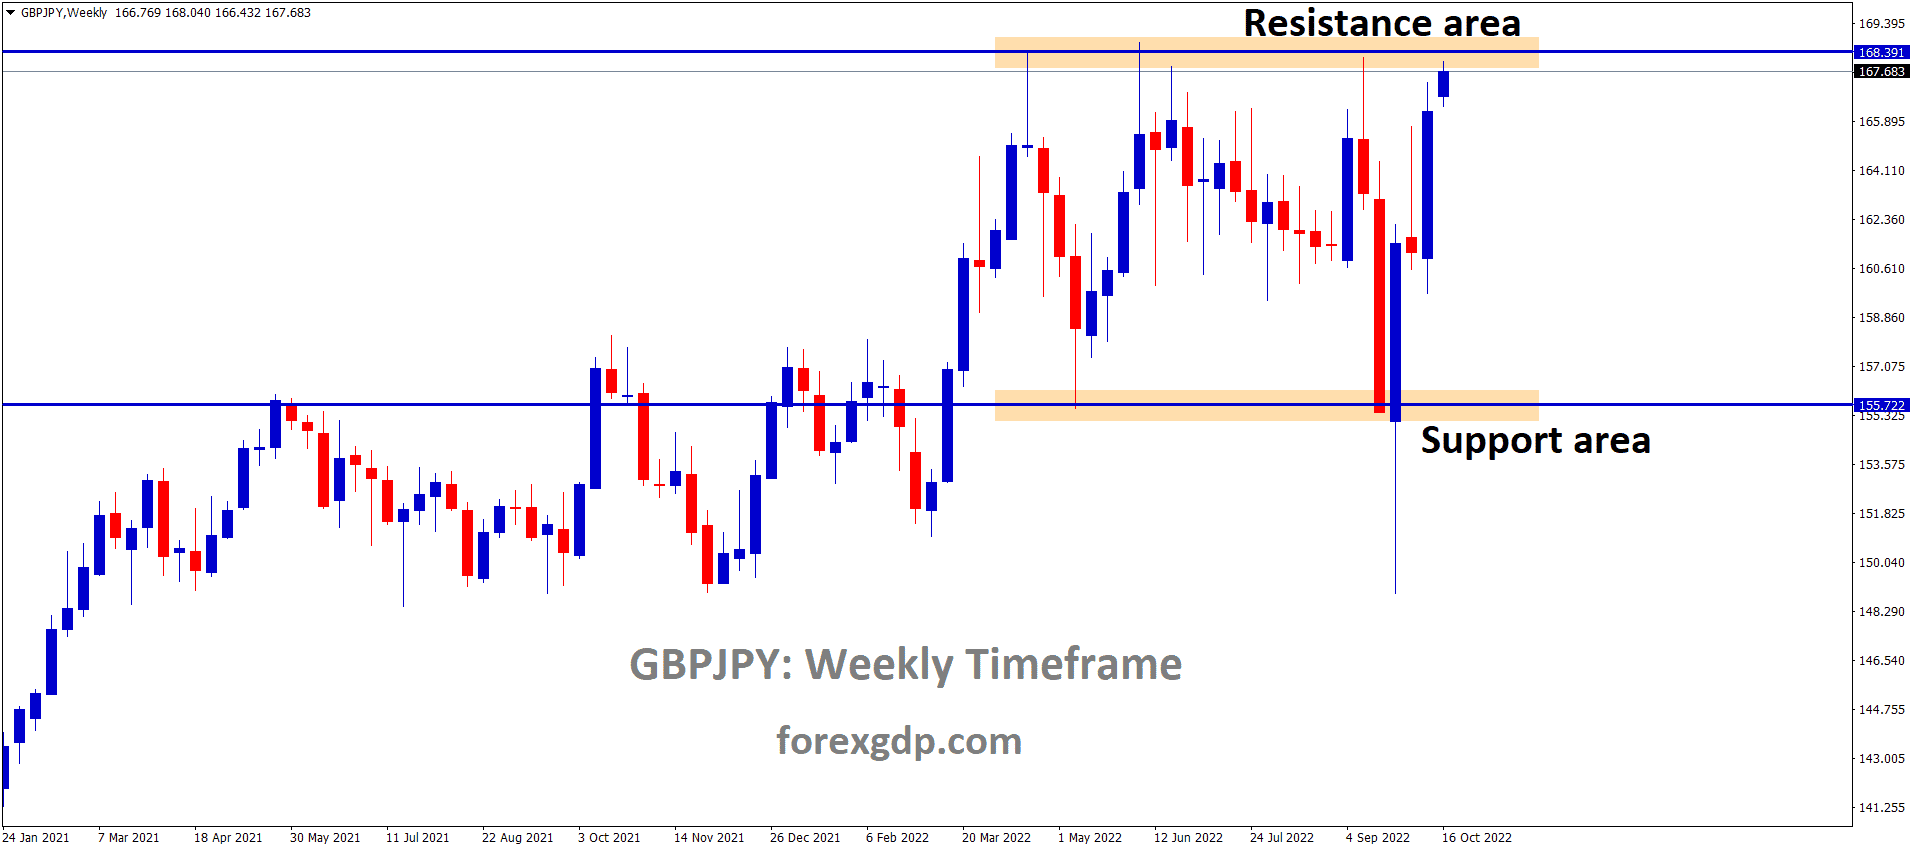 GBPJPY is moving in the Box Pattern and the market has reached the resistance area of the pattern